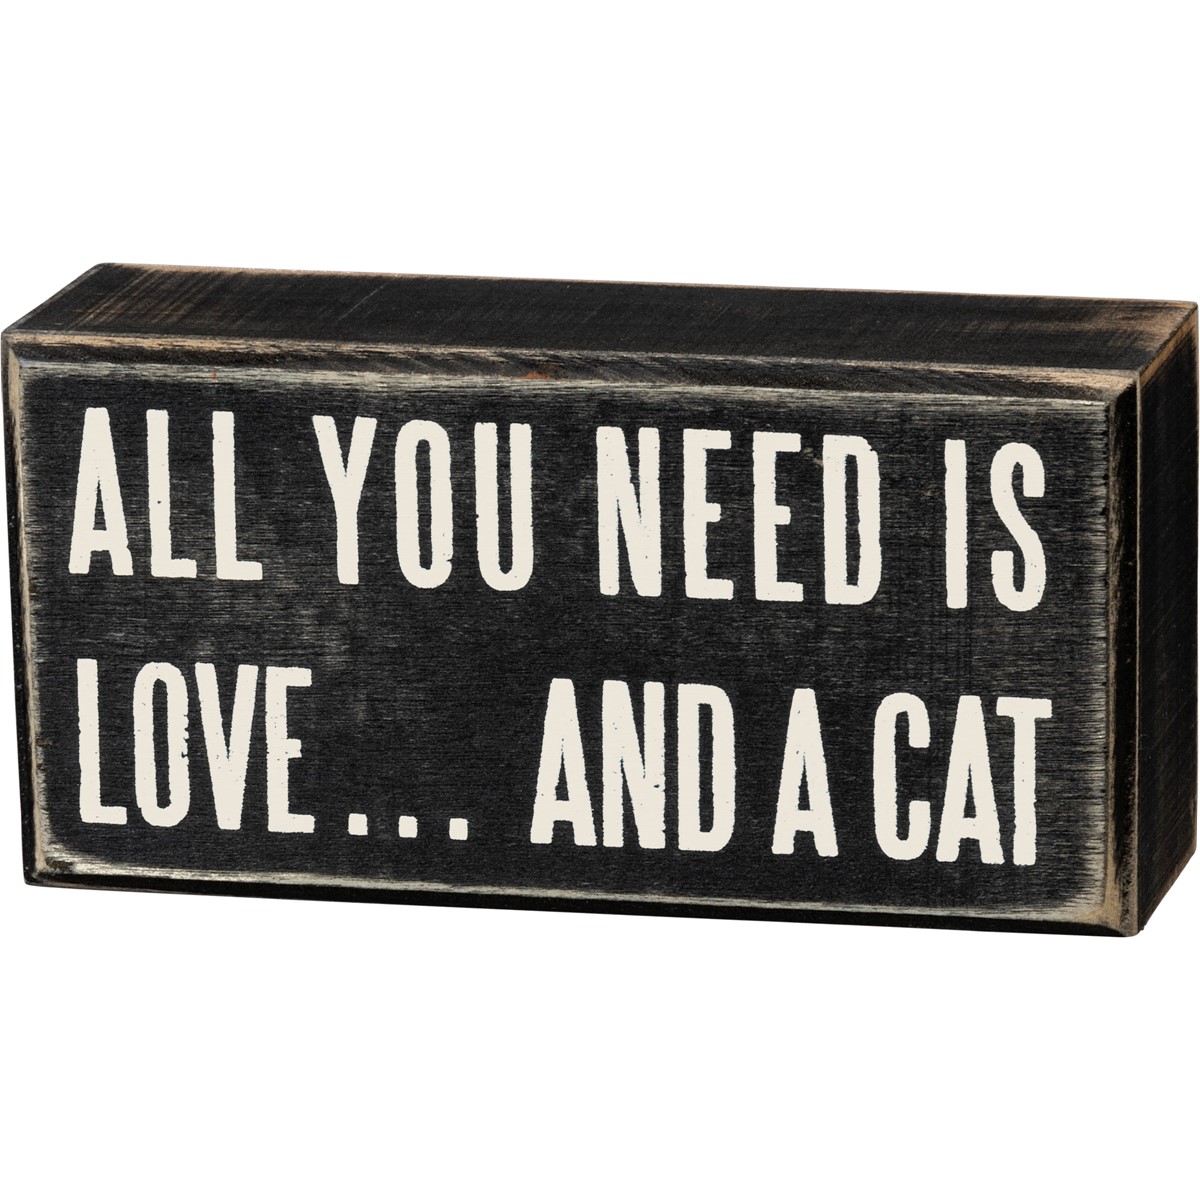 All You Need Is Love And A Cat Box Sign - Wood